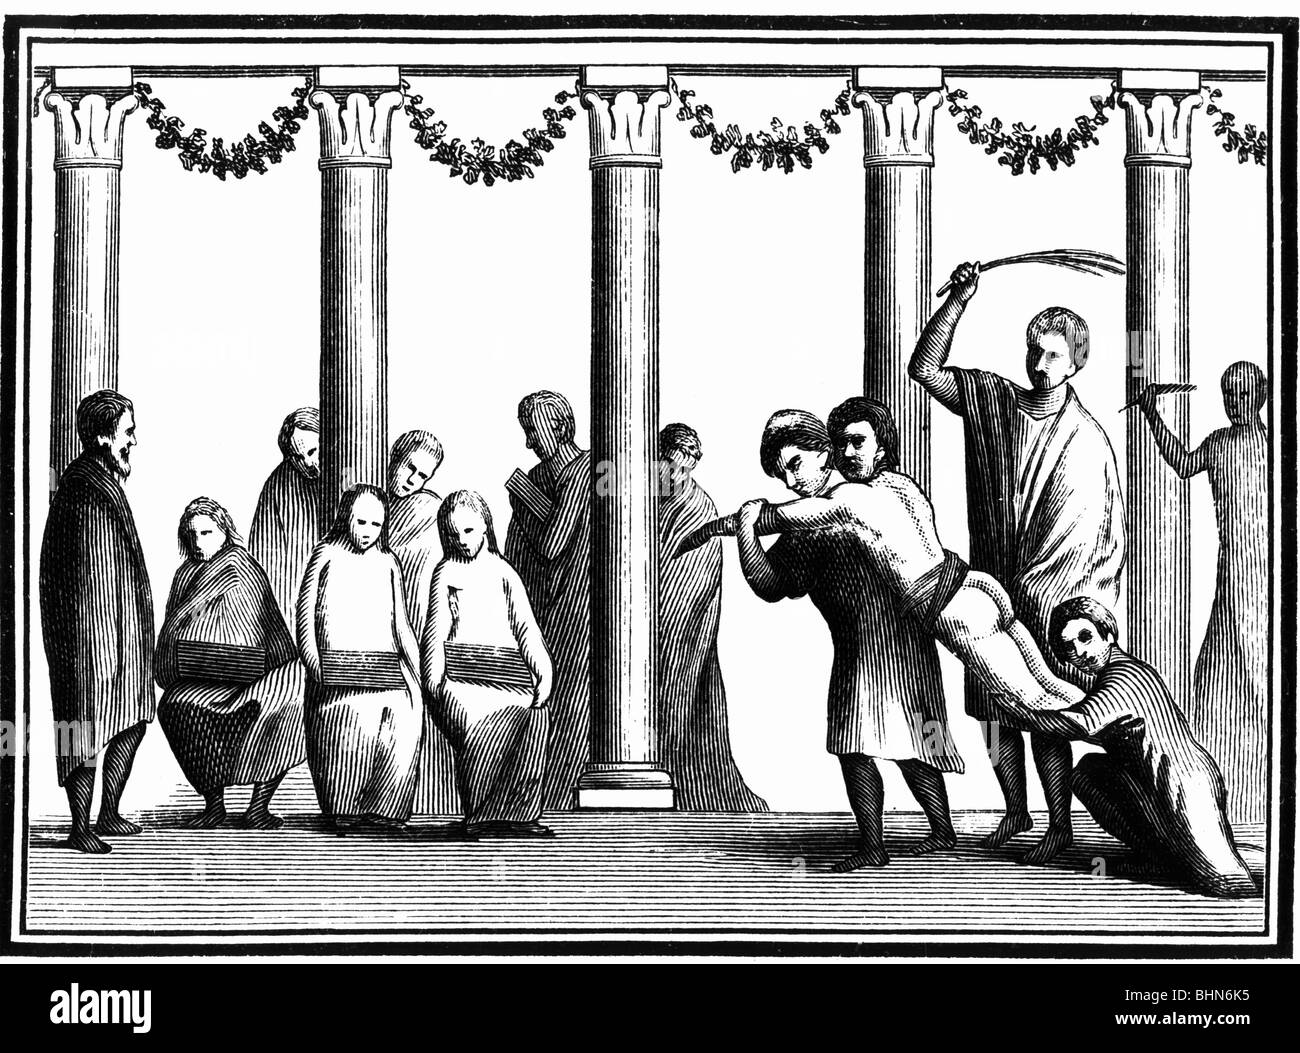 education, ancient world, fustigation, after wall painting from Pompeii, 1st century AD, wood engraving, 19th century, historic, historical, teacher, pupil, student, pupils, students, children, fustigate, chastising, punishing, penalisation, punishment, punishments, Roman Empire, rod, rods, column, ambulatory, ambulatories, feruling, ancient world, people, Stock Photo